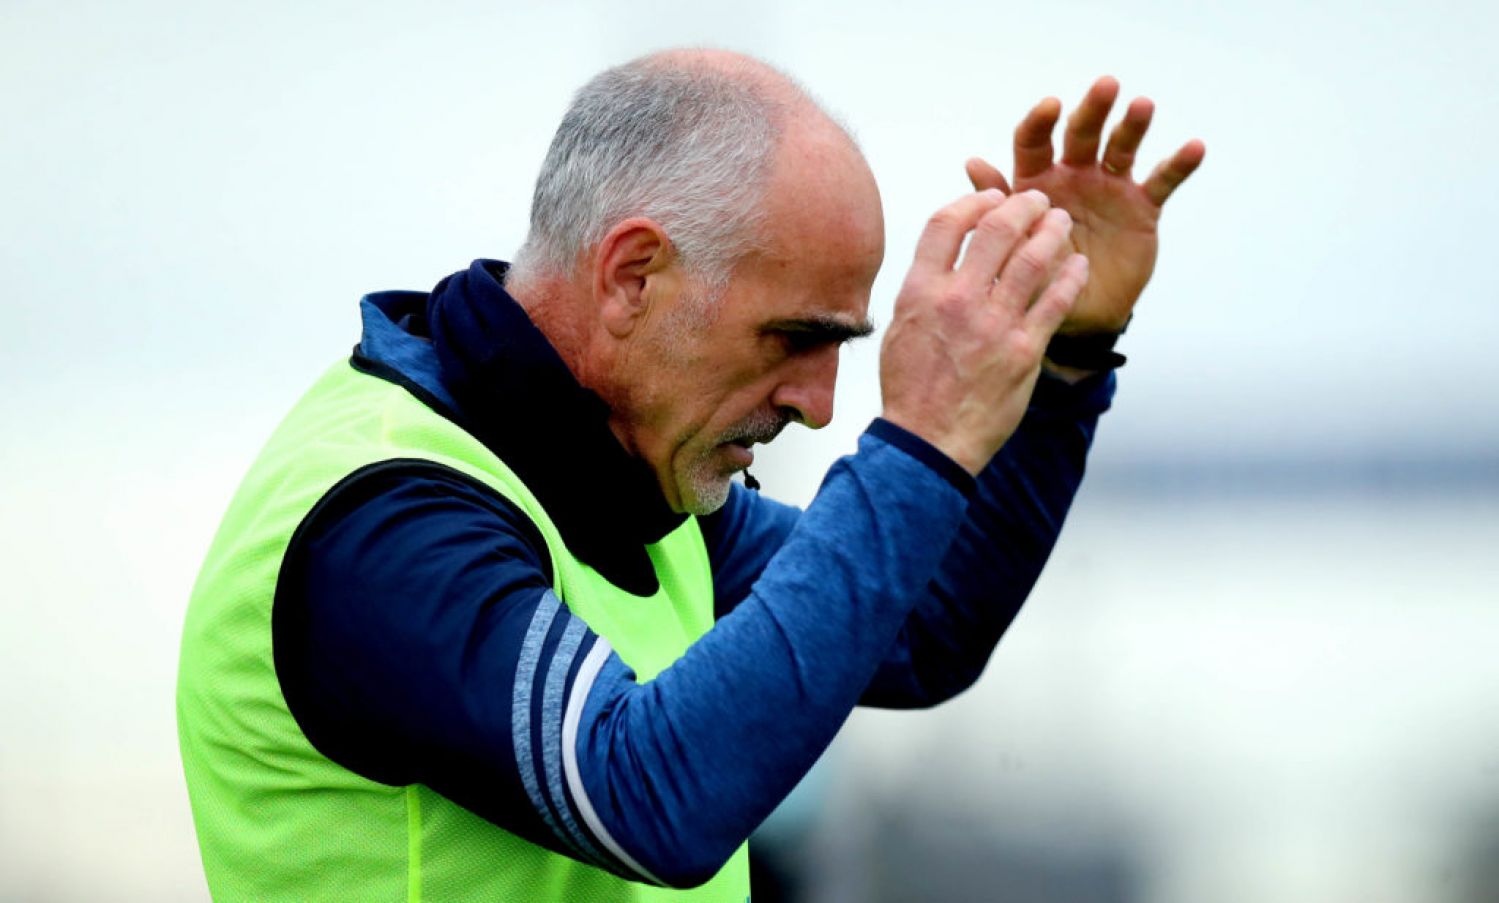 Roscommon Manager Anthony Cunningham. Credit ©Inpho/Ryan Byrne